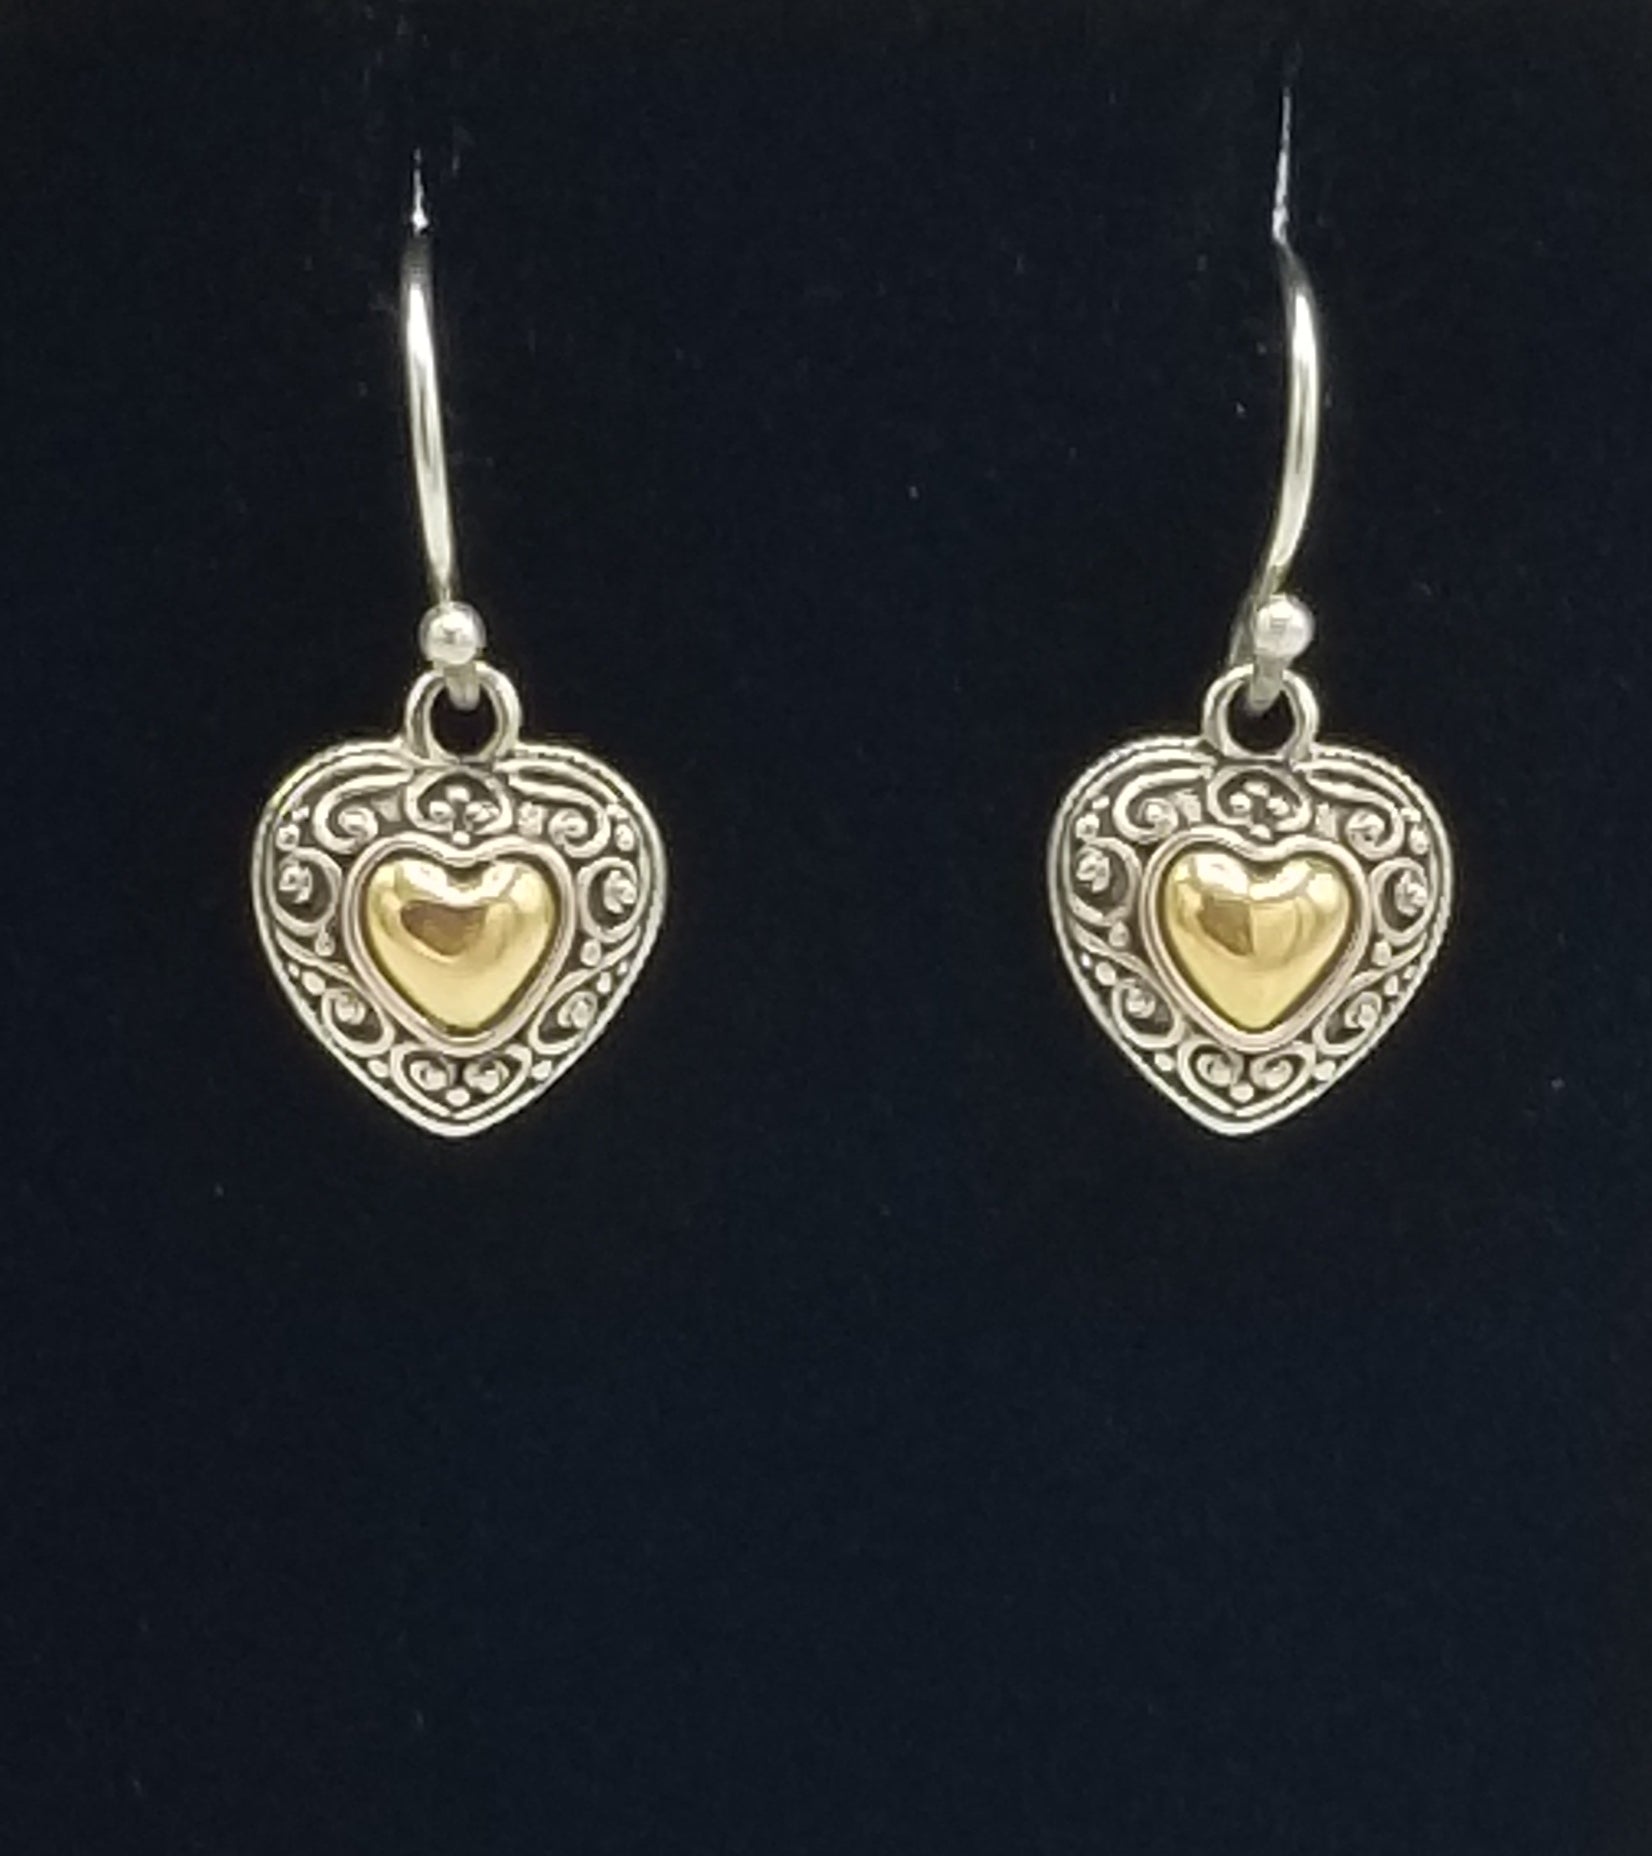 Heart two tone earrings - Sterling and gold tone